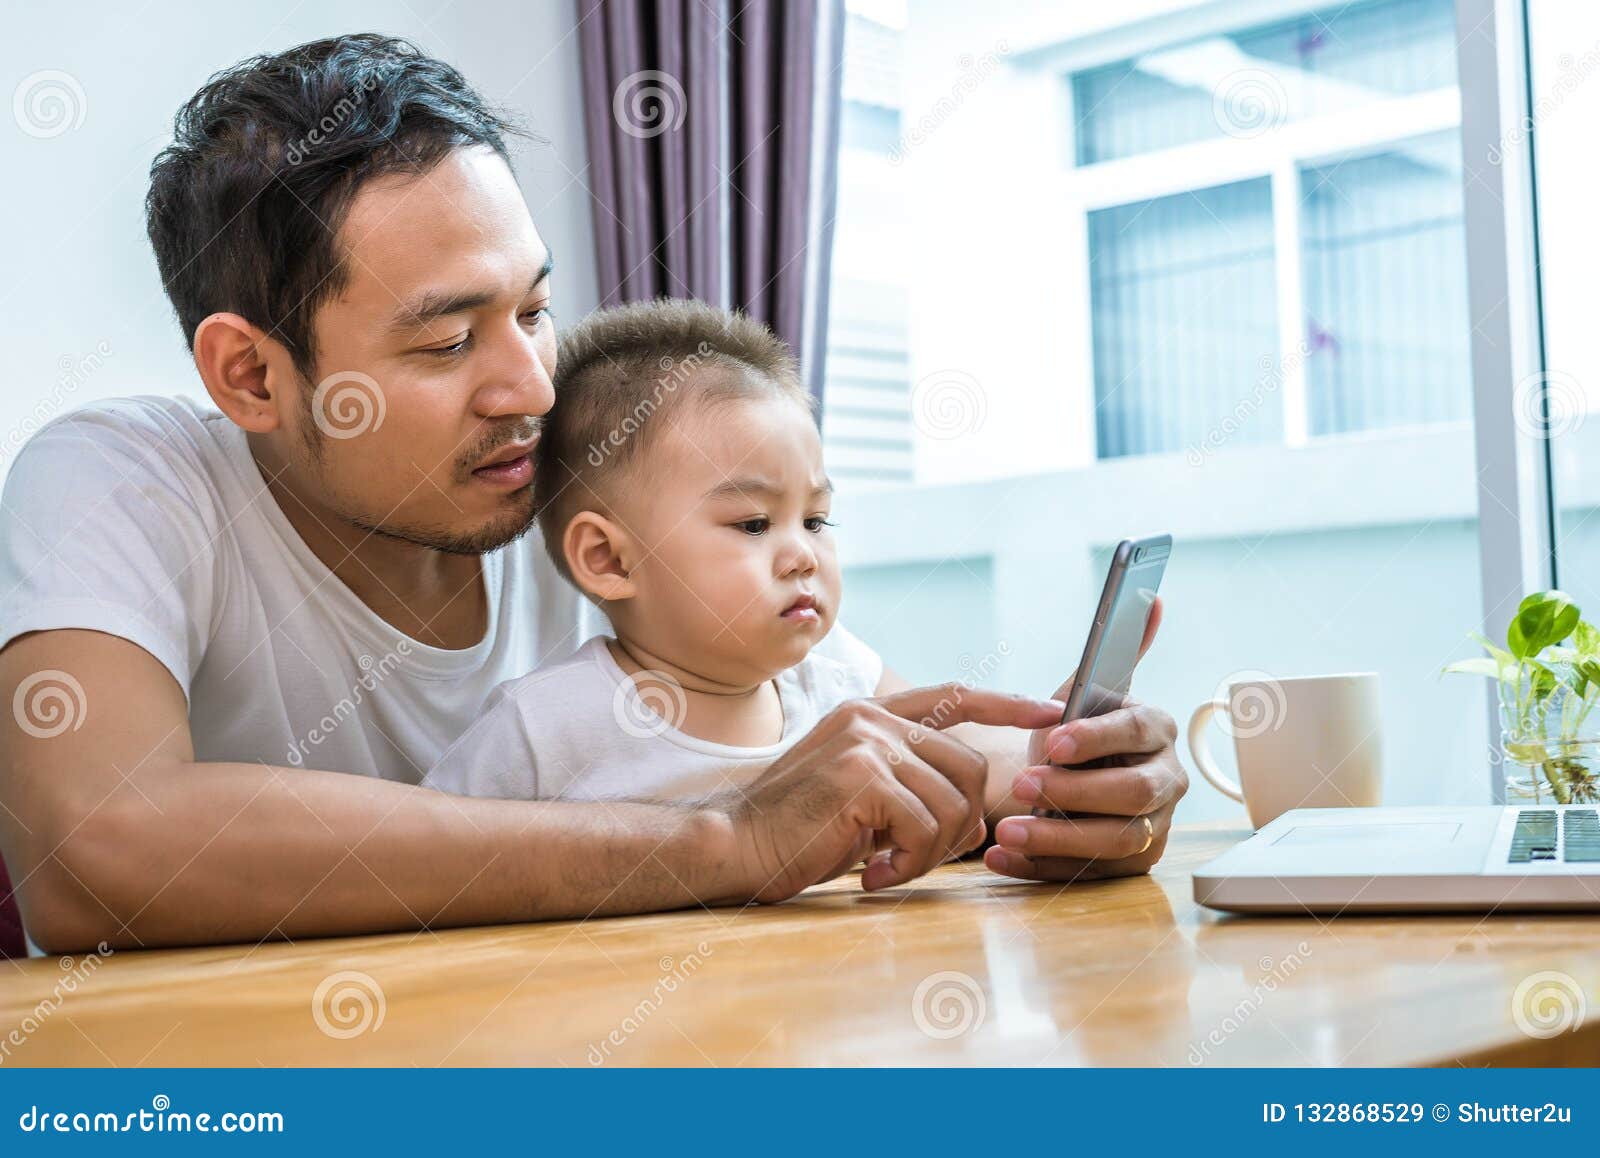 asian father and son using smart phone together in home background. technology and people concept. lifestyles and happy family th